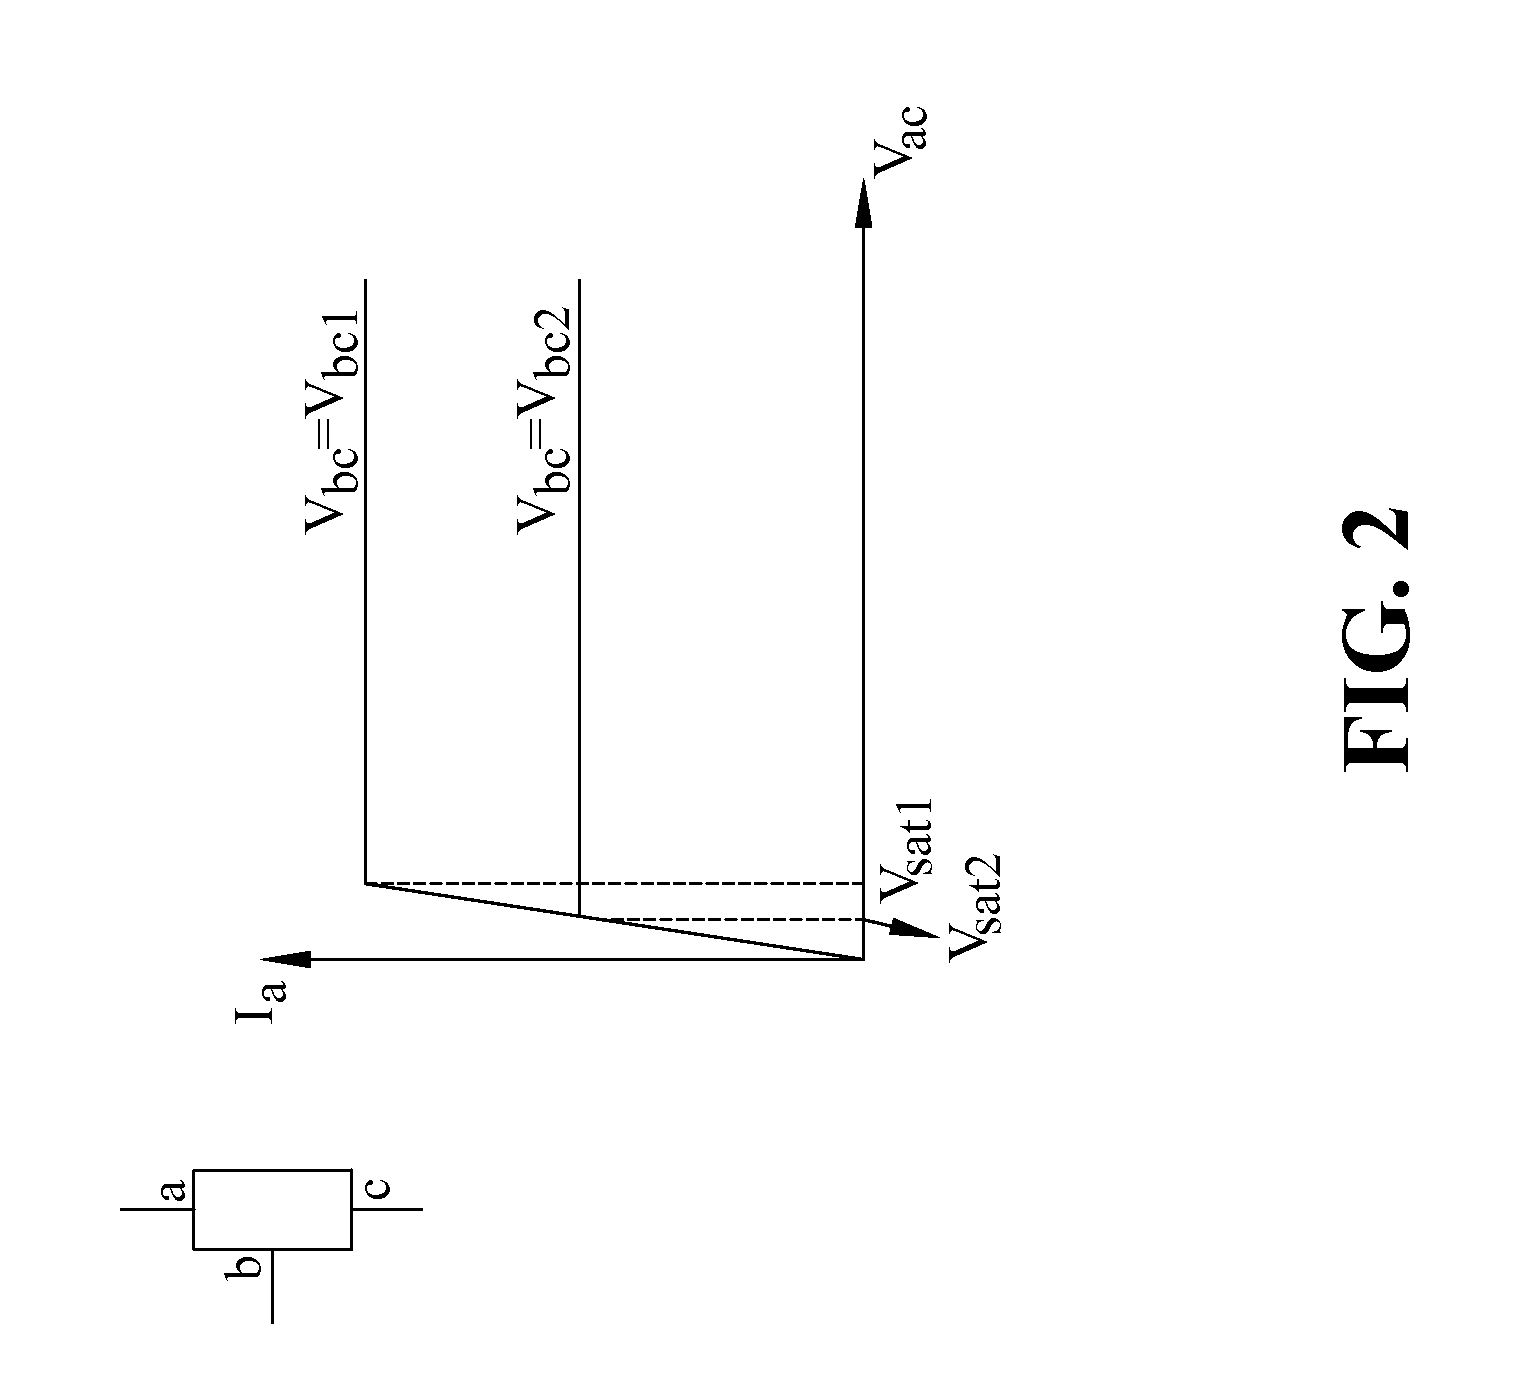 Apparatus for driving LEDs using high voltage